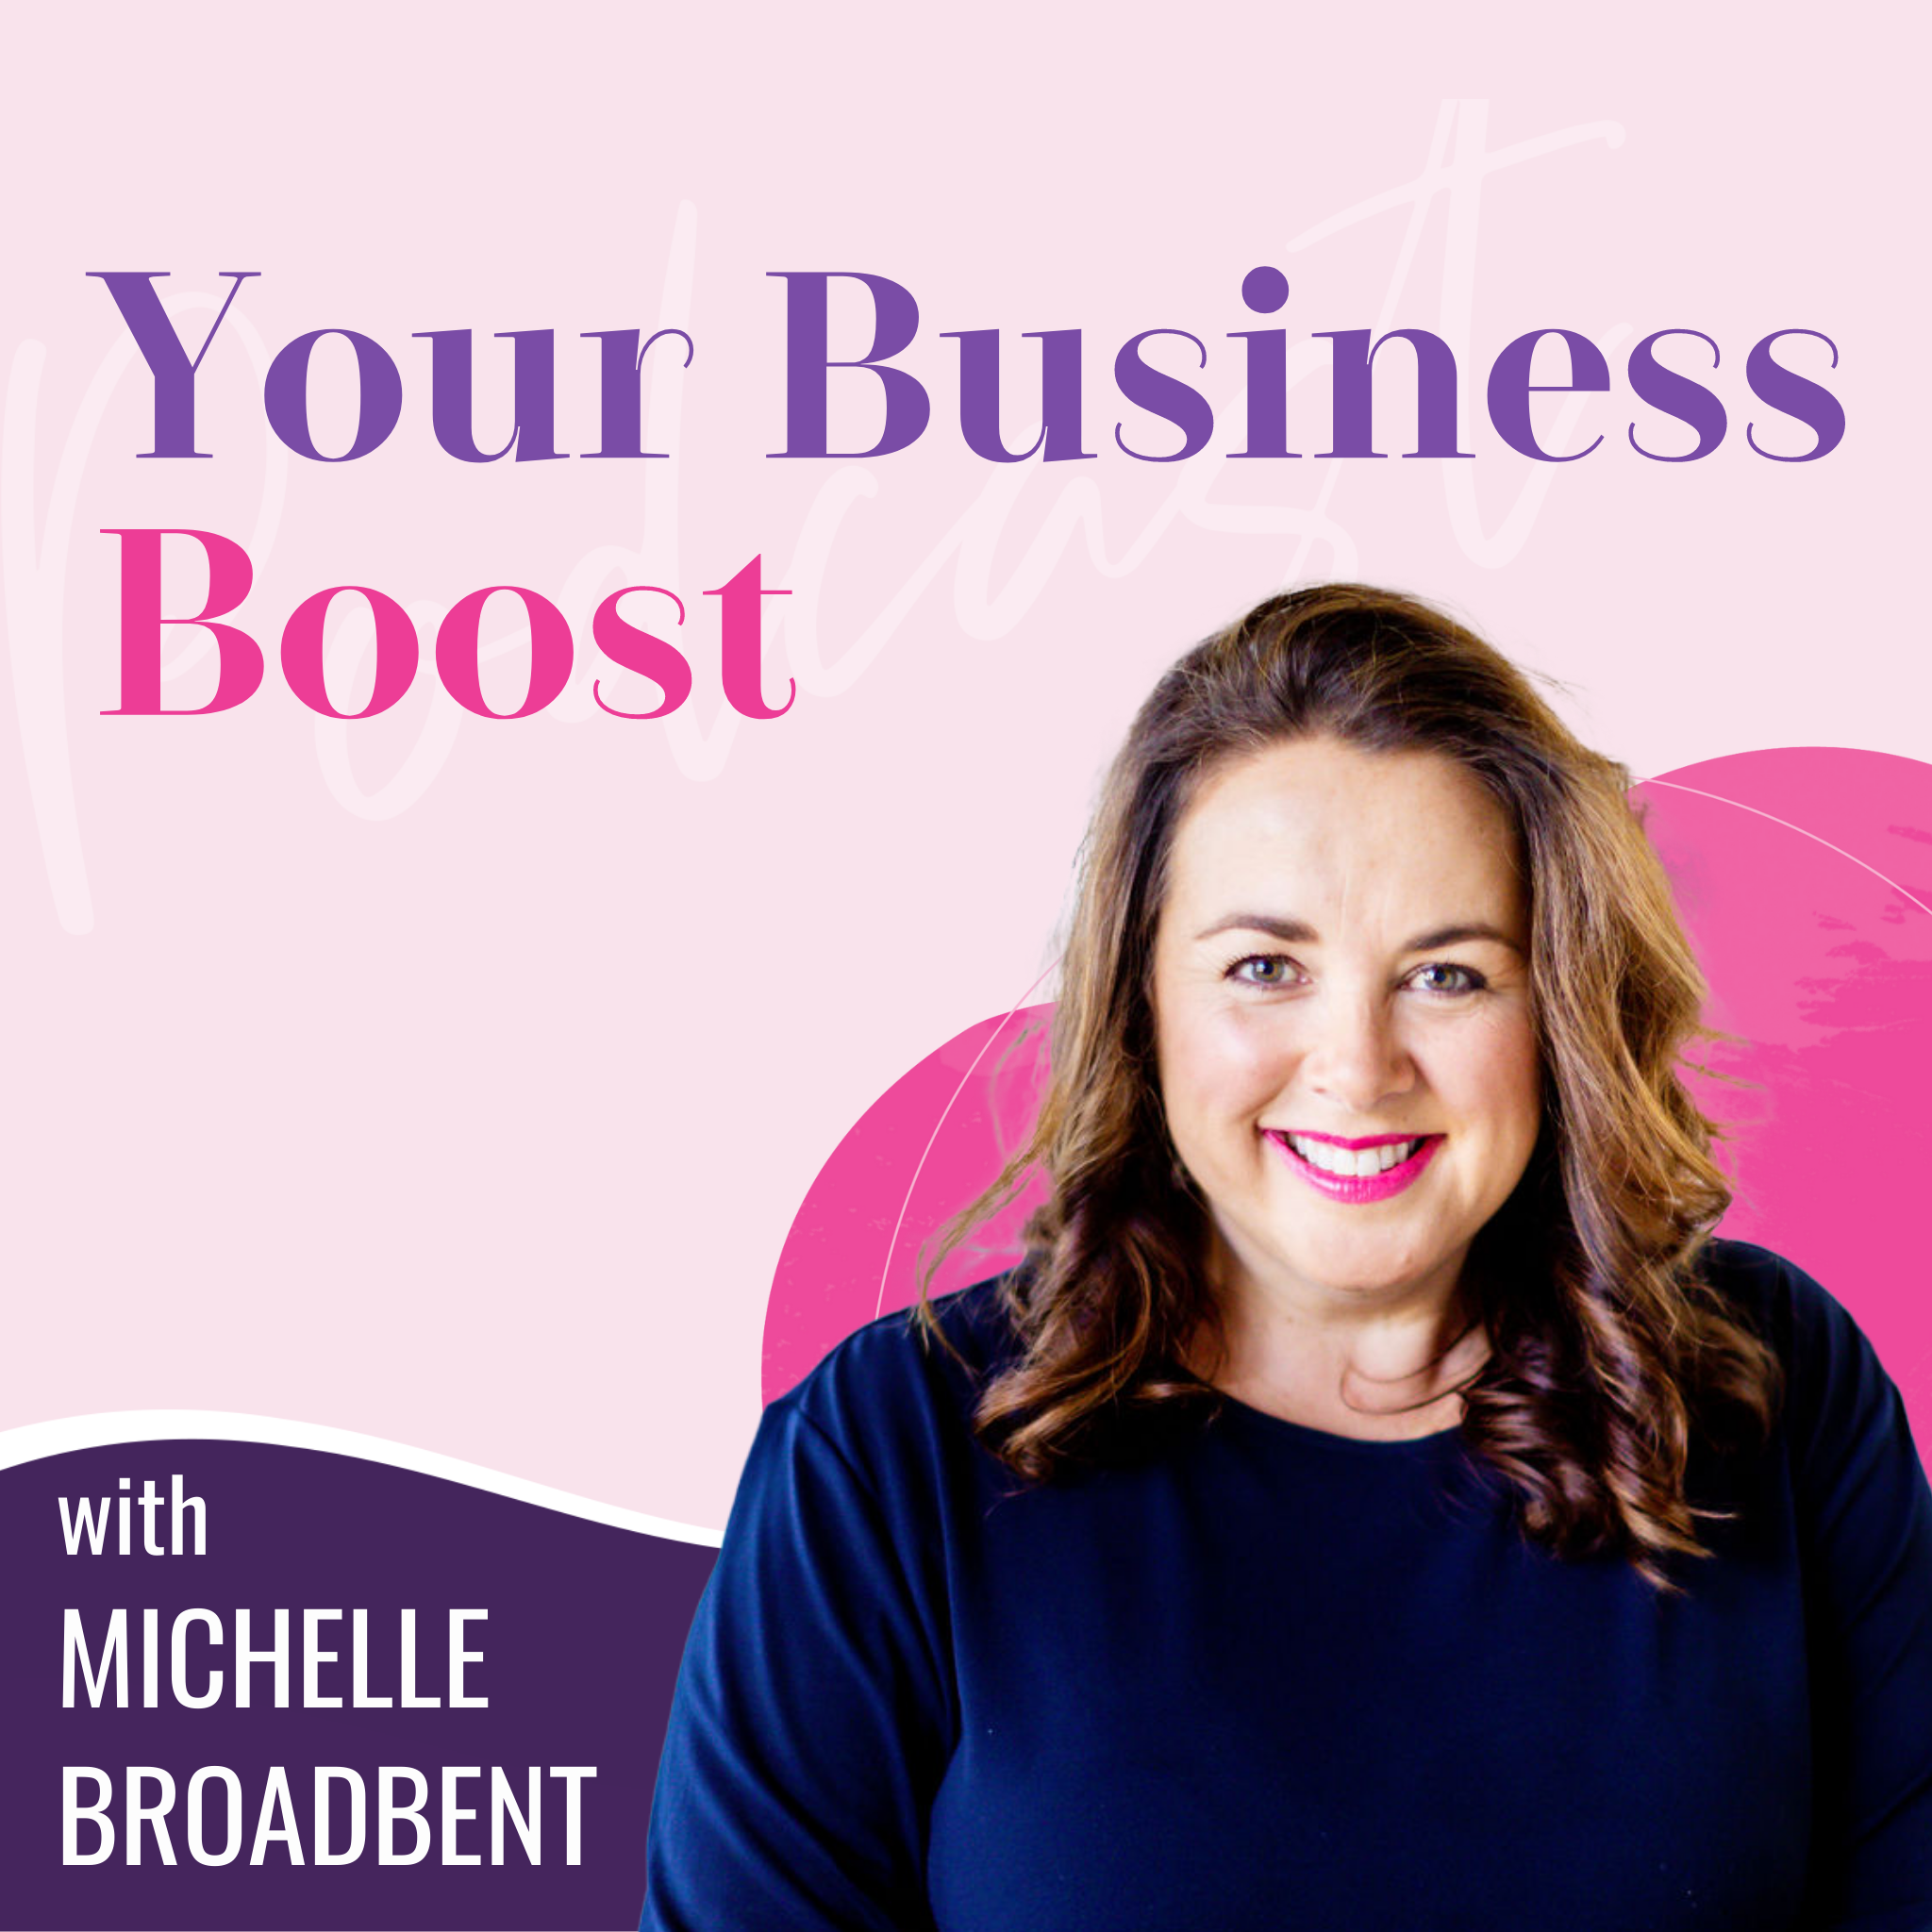 Productising Your Expertise with Sharon Darmody